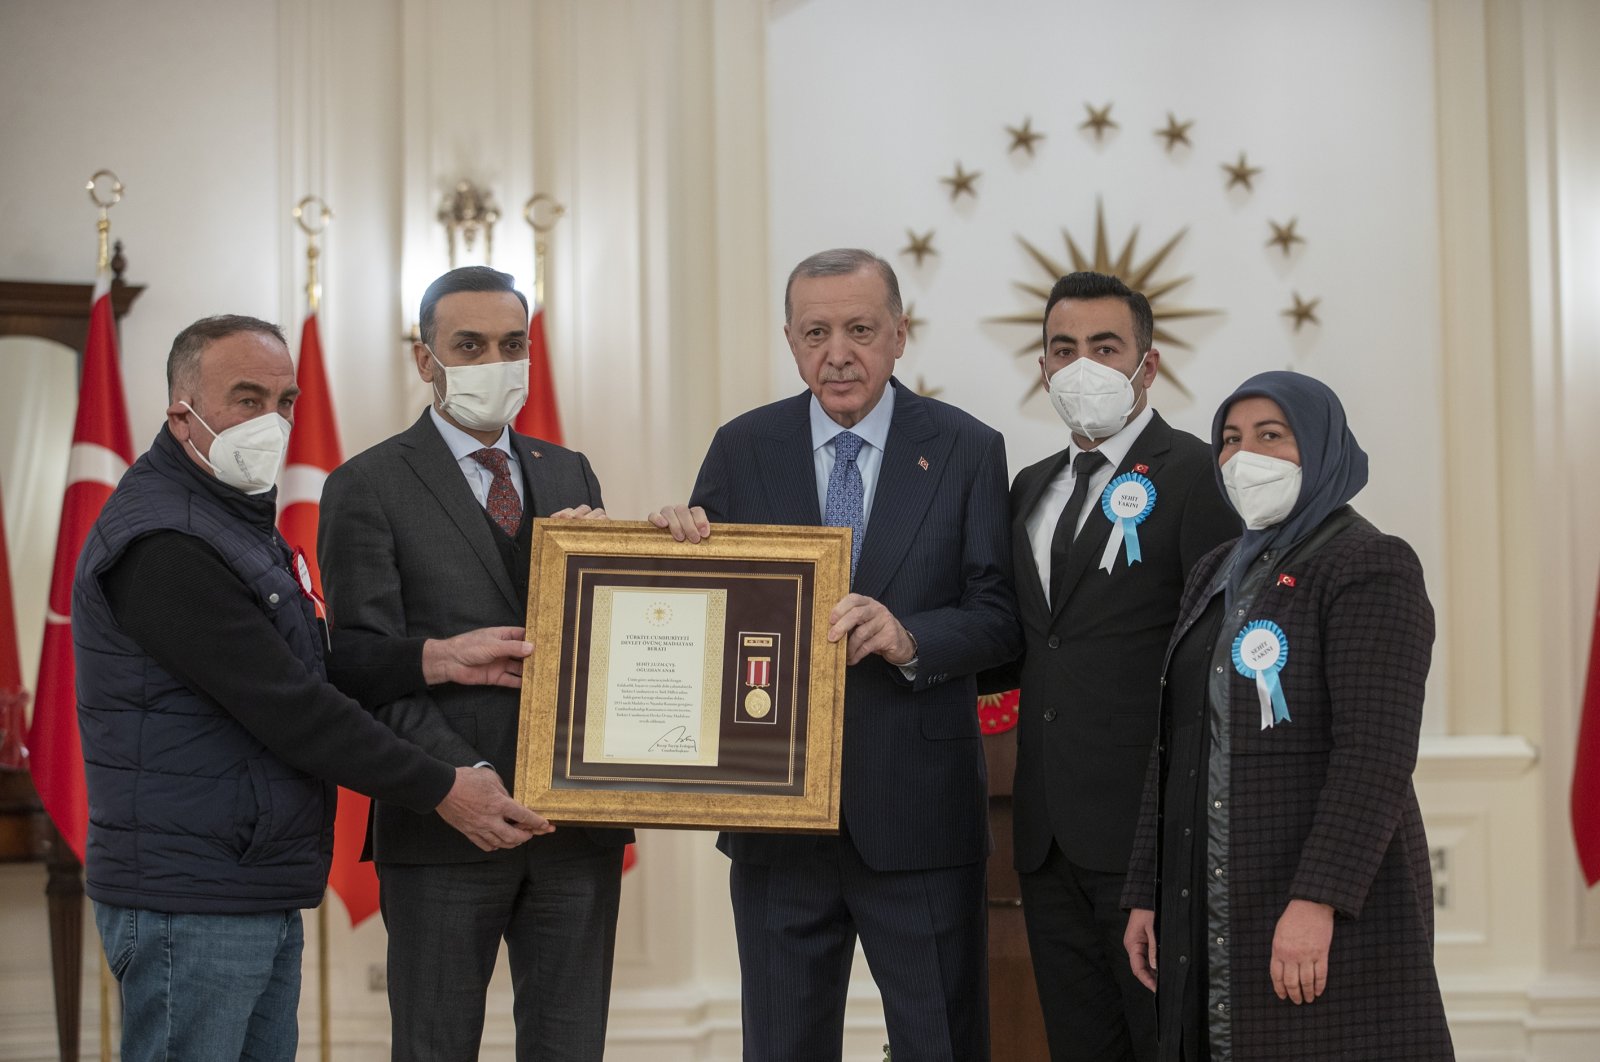 President Recep Tayyip Erdoğan (C) presents medals to families of fallen soldiers at the ceremony in the capital Ankara, Turkey, March 16, 2022. (AA PHOTO)